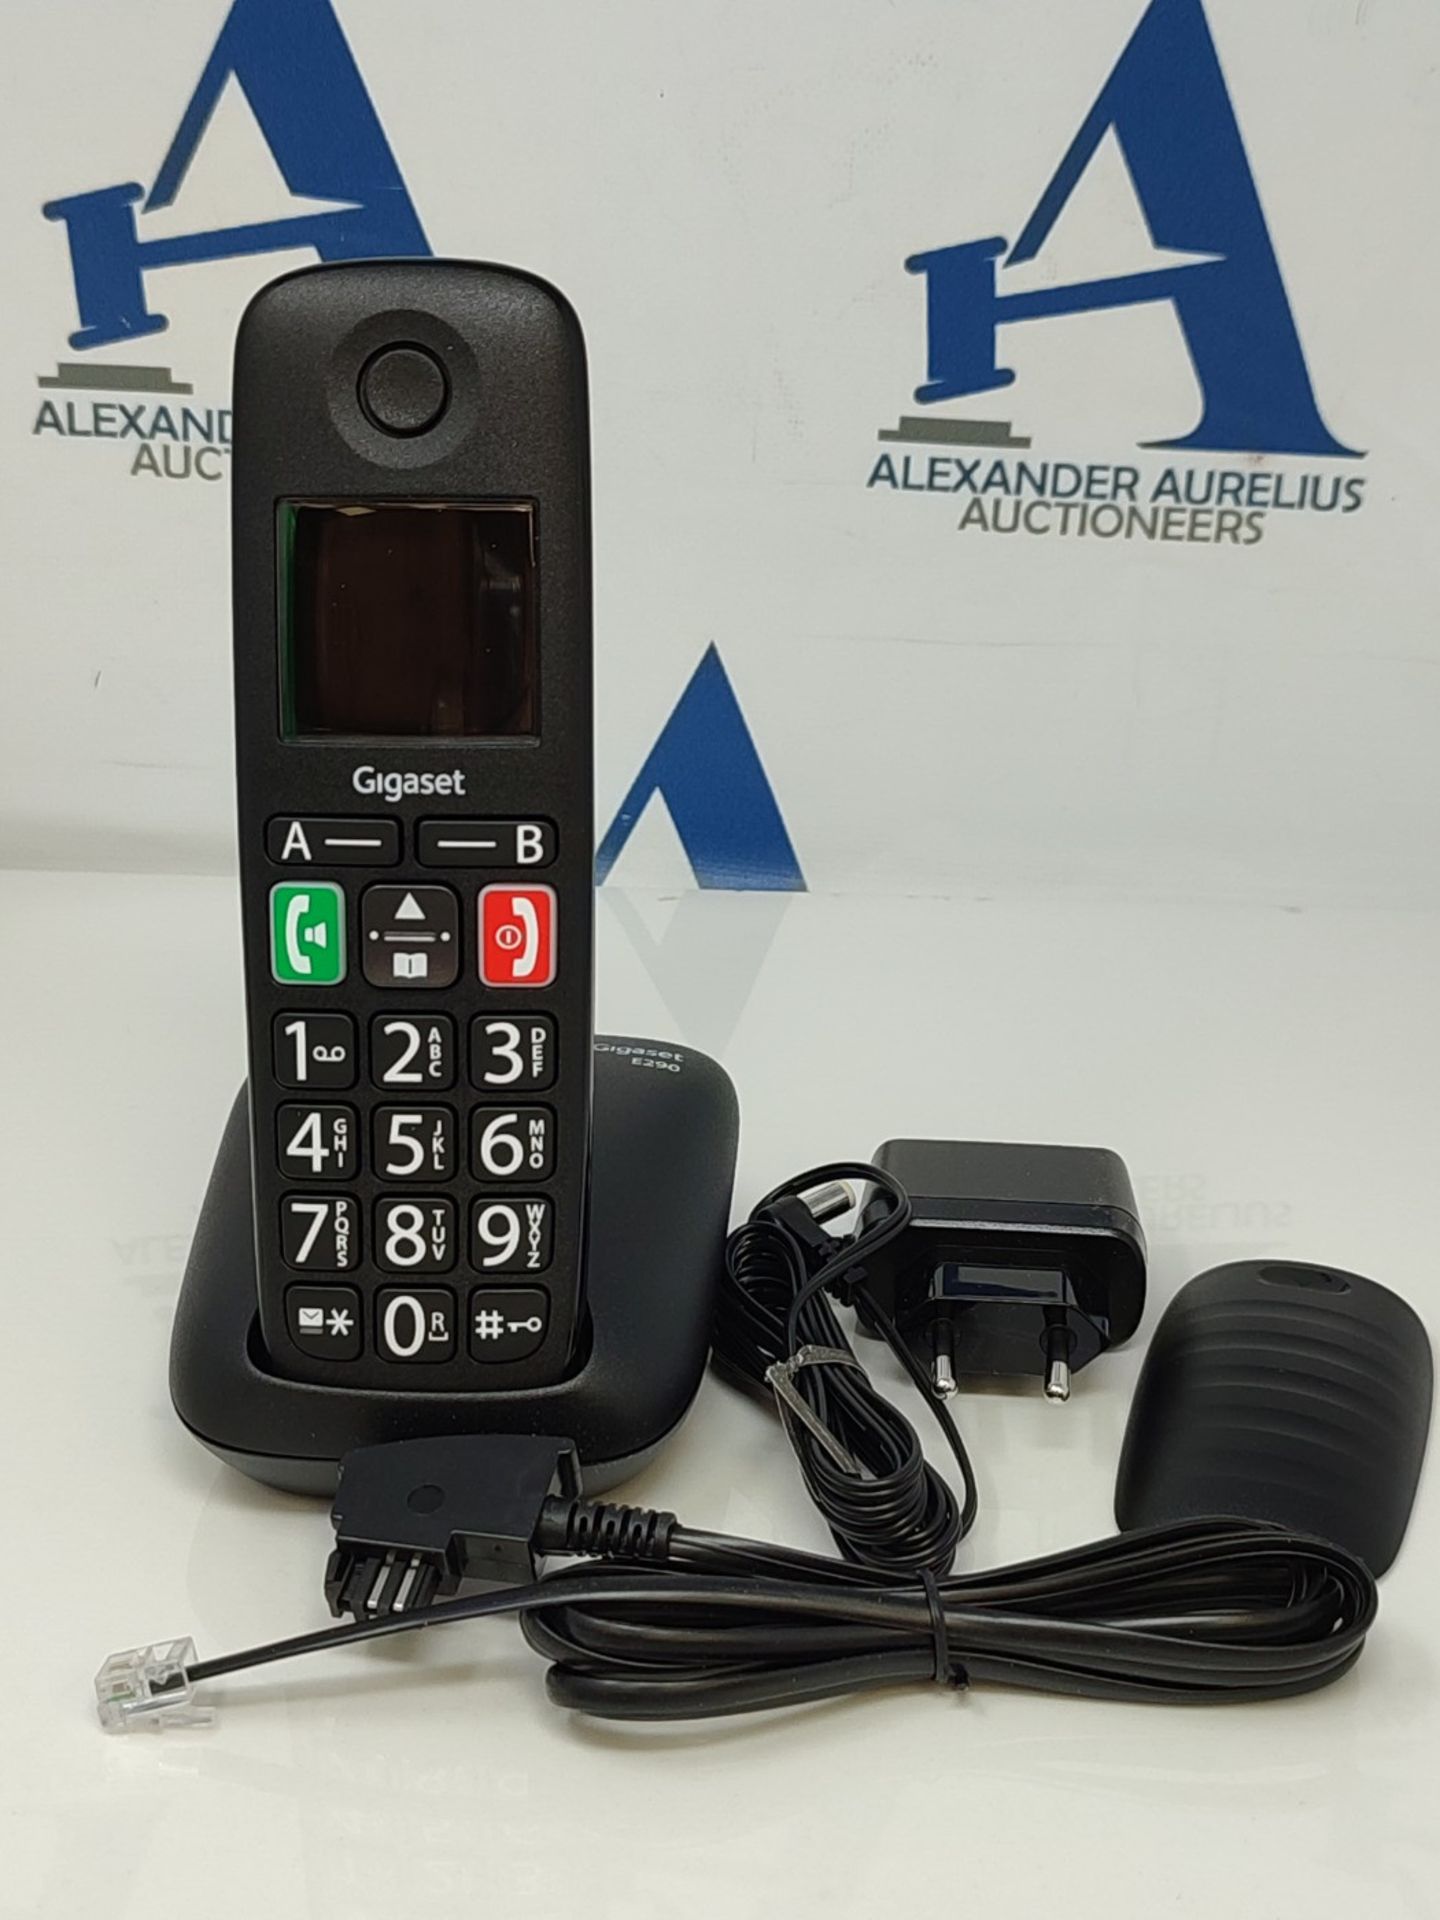 Gigaset E290 - Cordless senior phone without answering machine with large buttons - la - Image 2 of 4